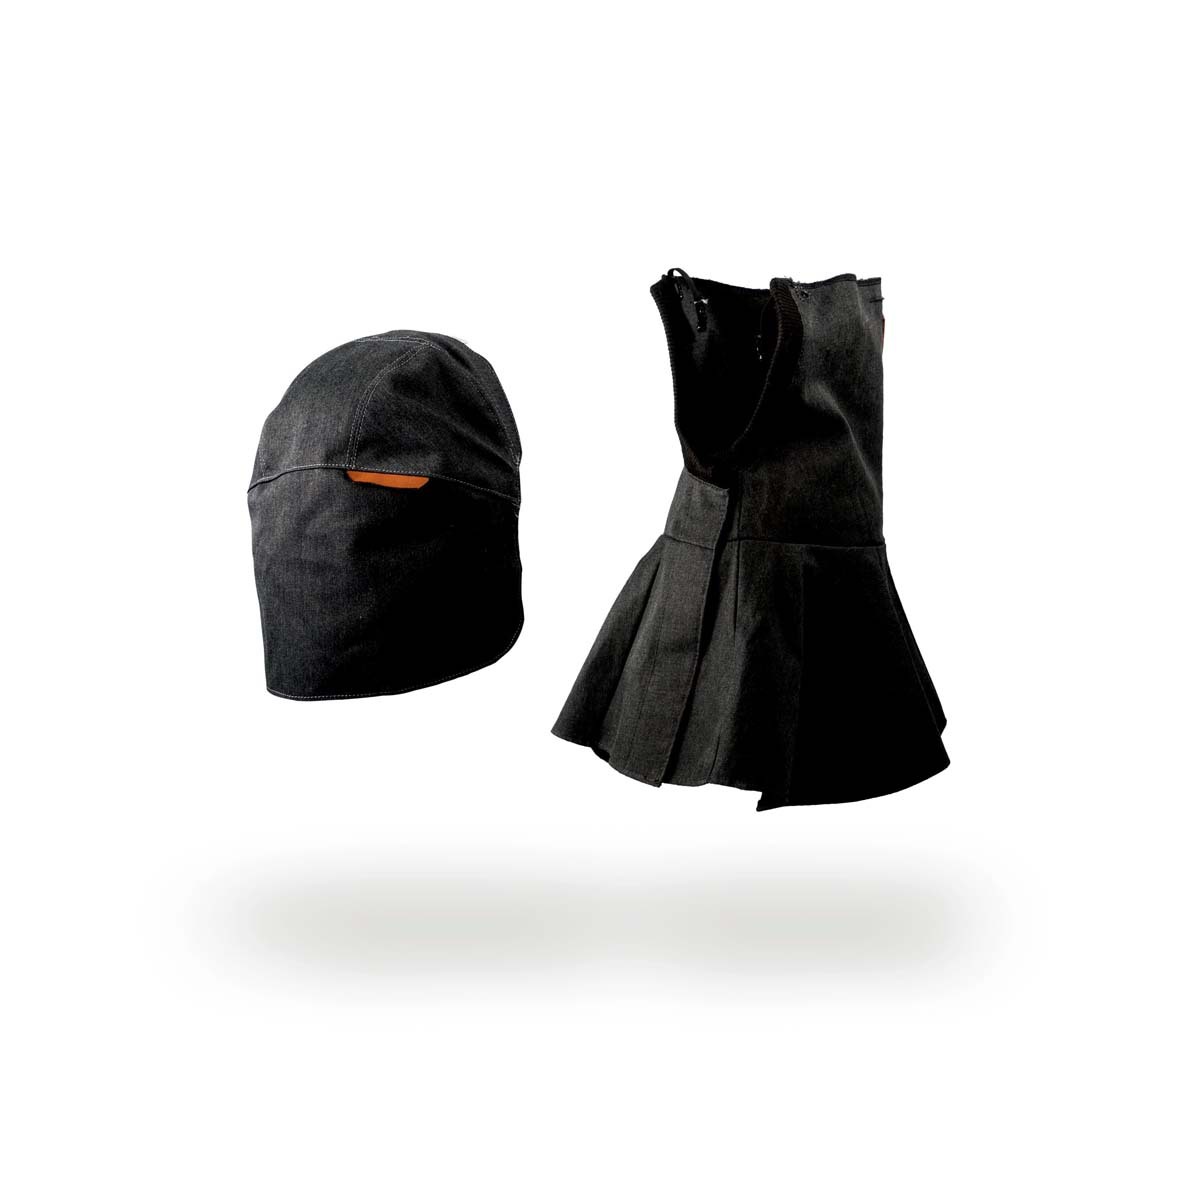 3M™ Black Speedglas™ Assigned Protection Factor (APF) Kit Flame Retardant Neck Shroud And Large Head Cover (For G5-01 Welding He